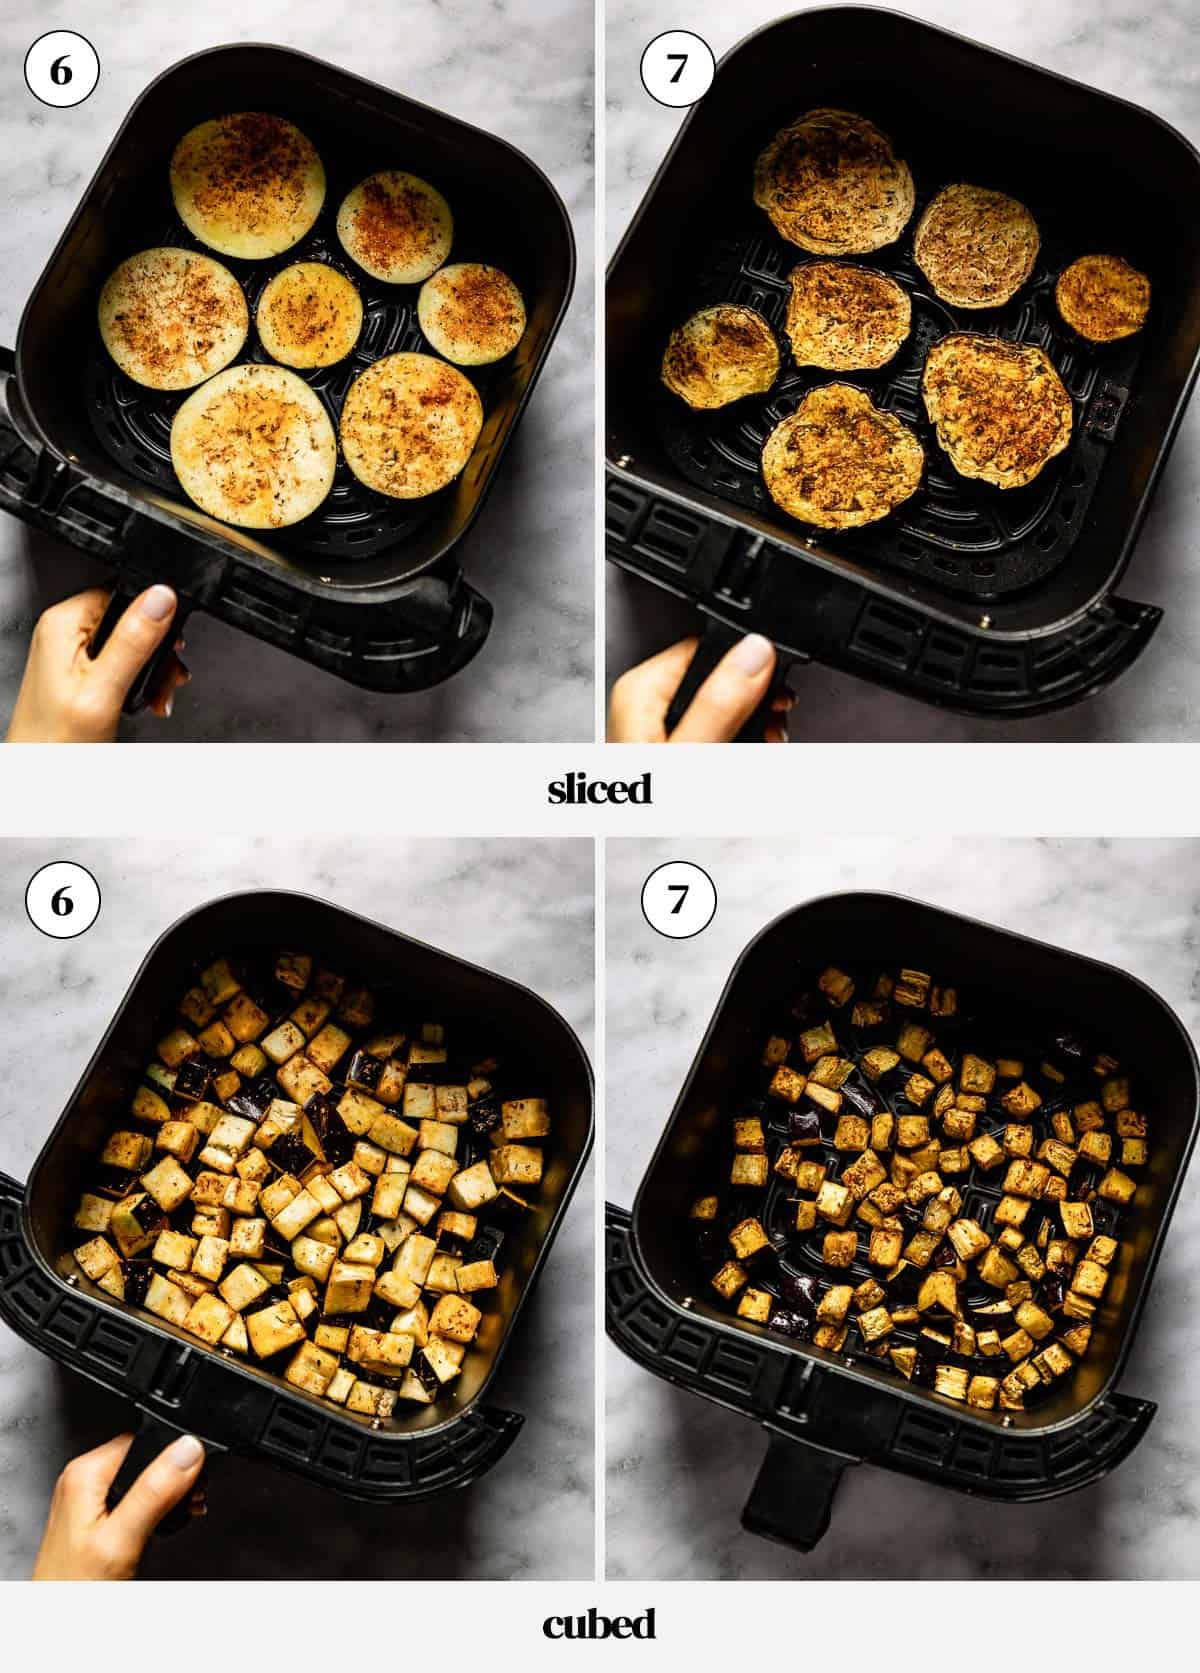 Person showing how to cook eggplant slices and eggplant cubes in the air fryer.